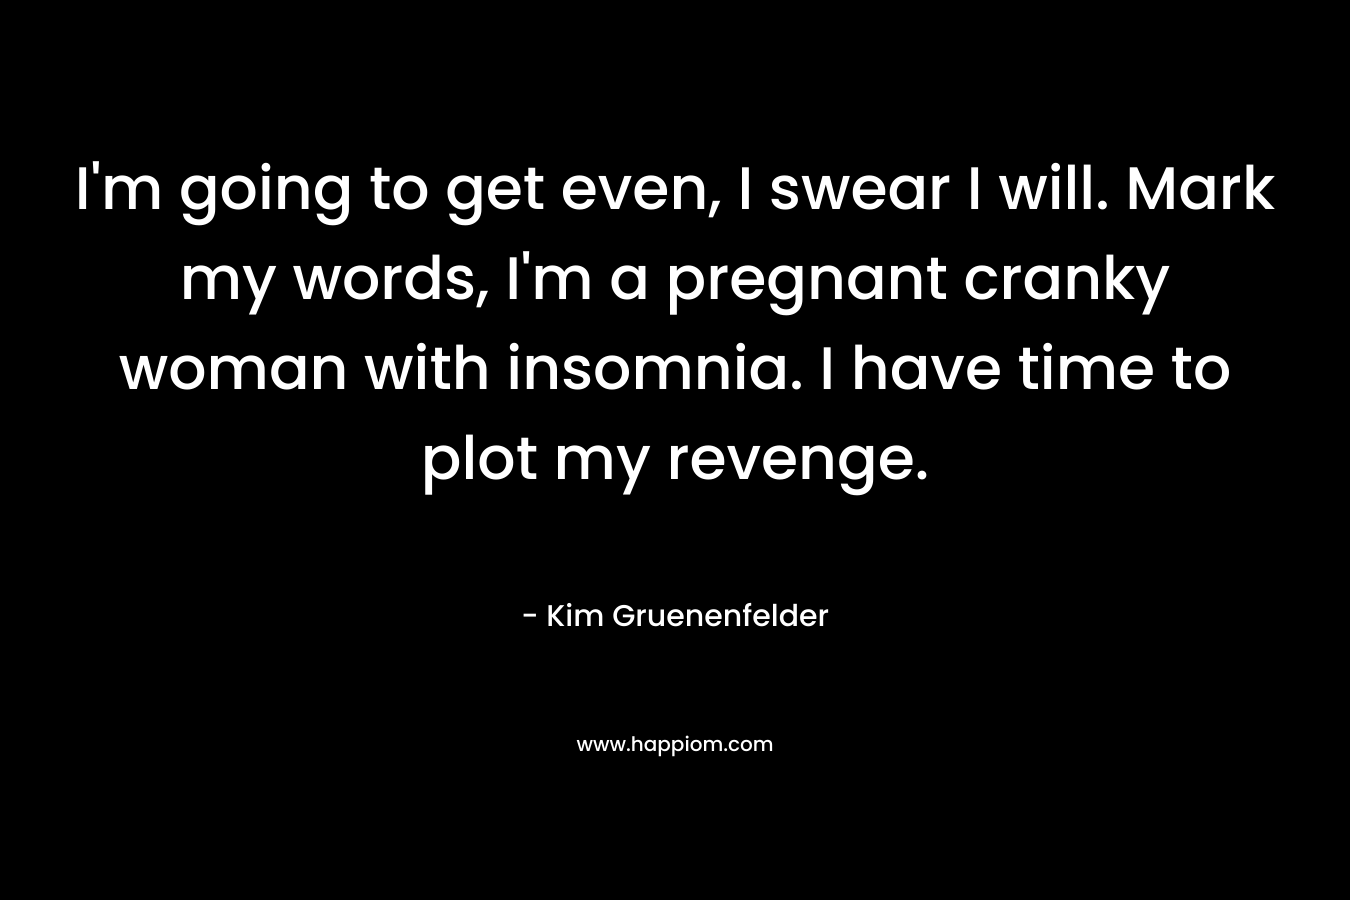 I’m going to get even, I swear I will. Mark my words, I’m a pregnant cranky woman with insomnia. I have time to plot my revenge. – Kim Gruenenfelder